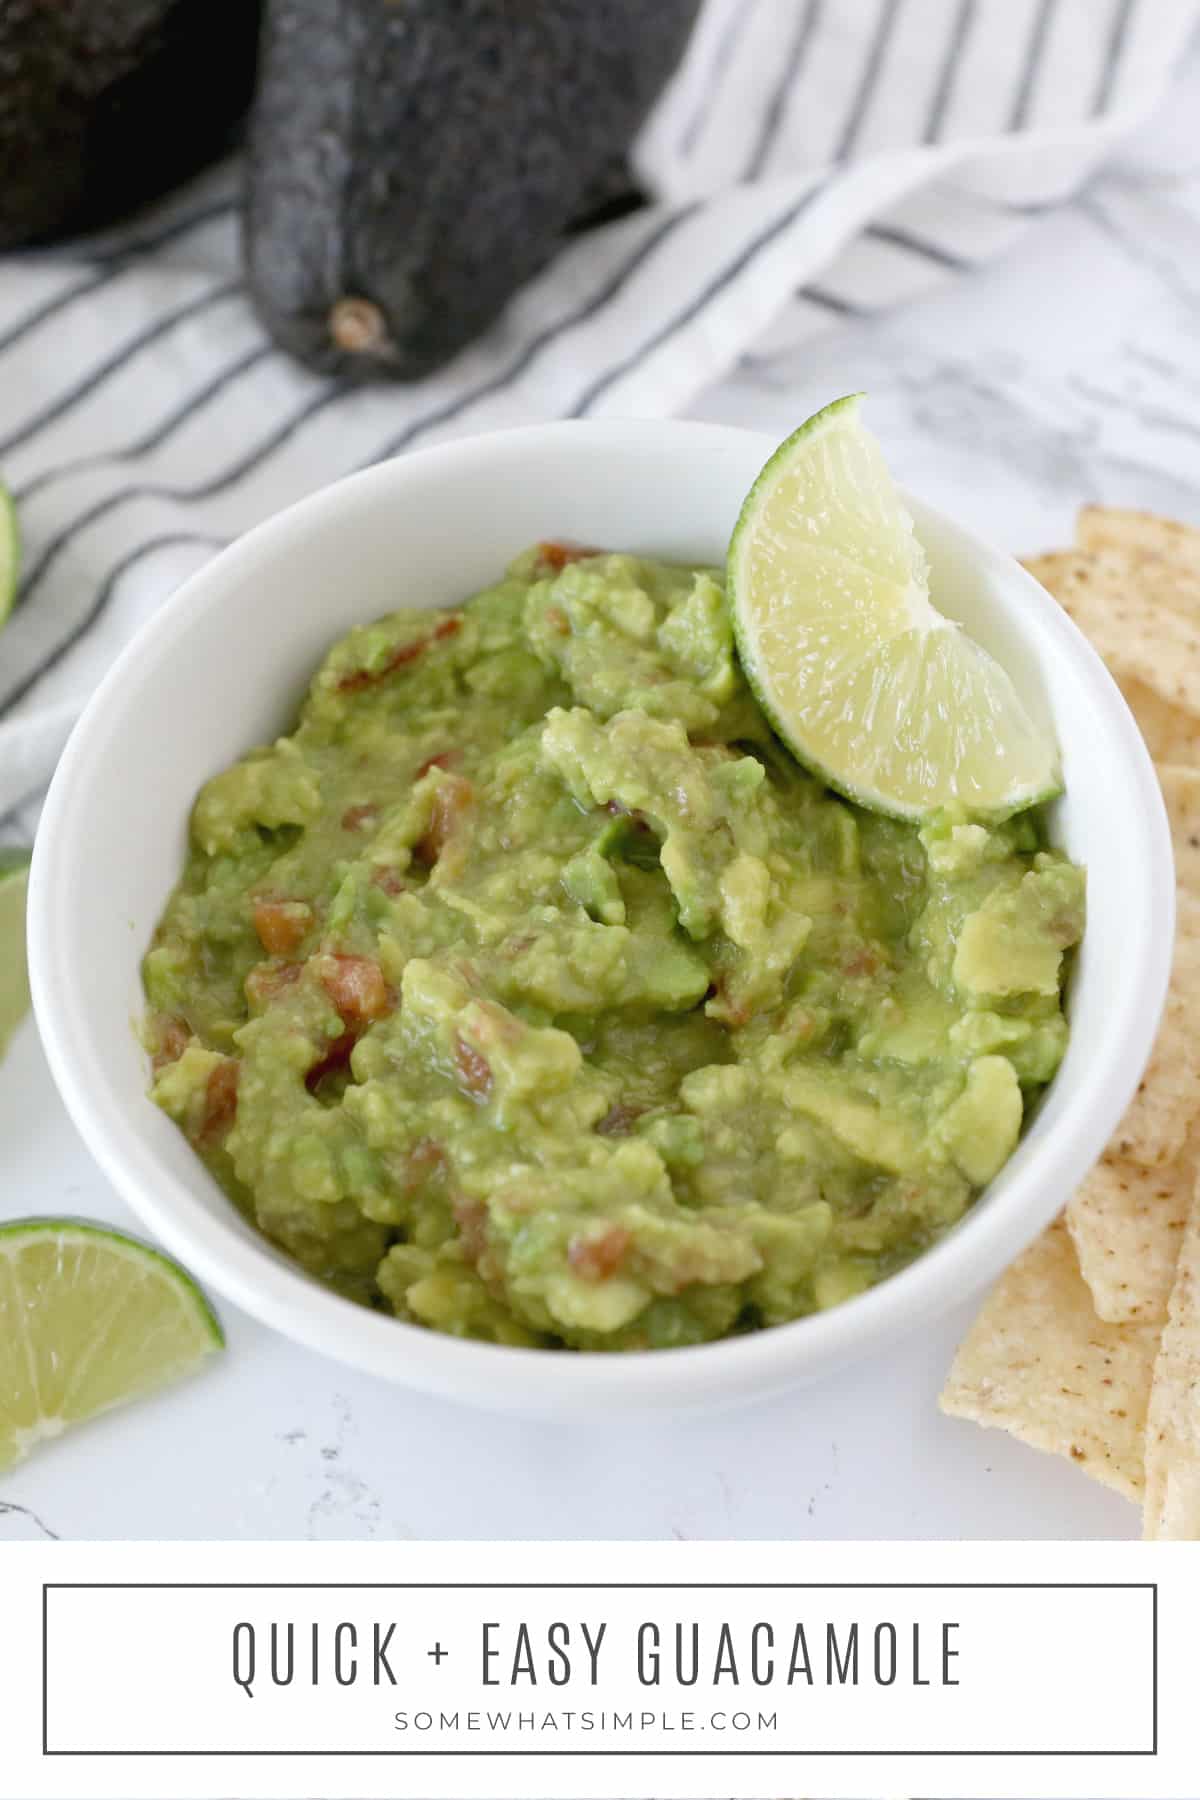 Get the best of both worlds with this deliciously simple guacamole recipe. This quick guacamole recipe is made with only 3 ingredients and can be ready to eat in under 5 minutes! via @somewhatsimple